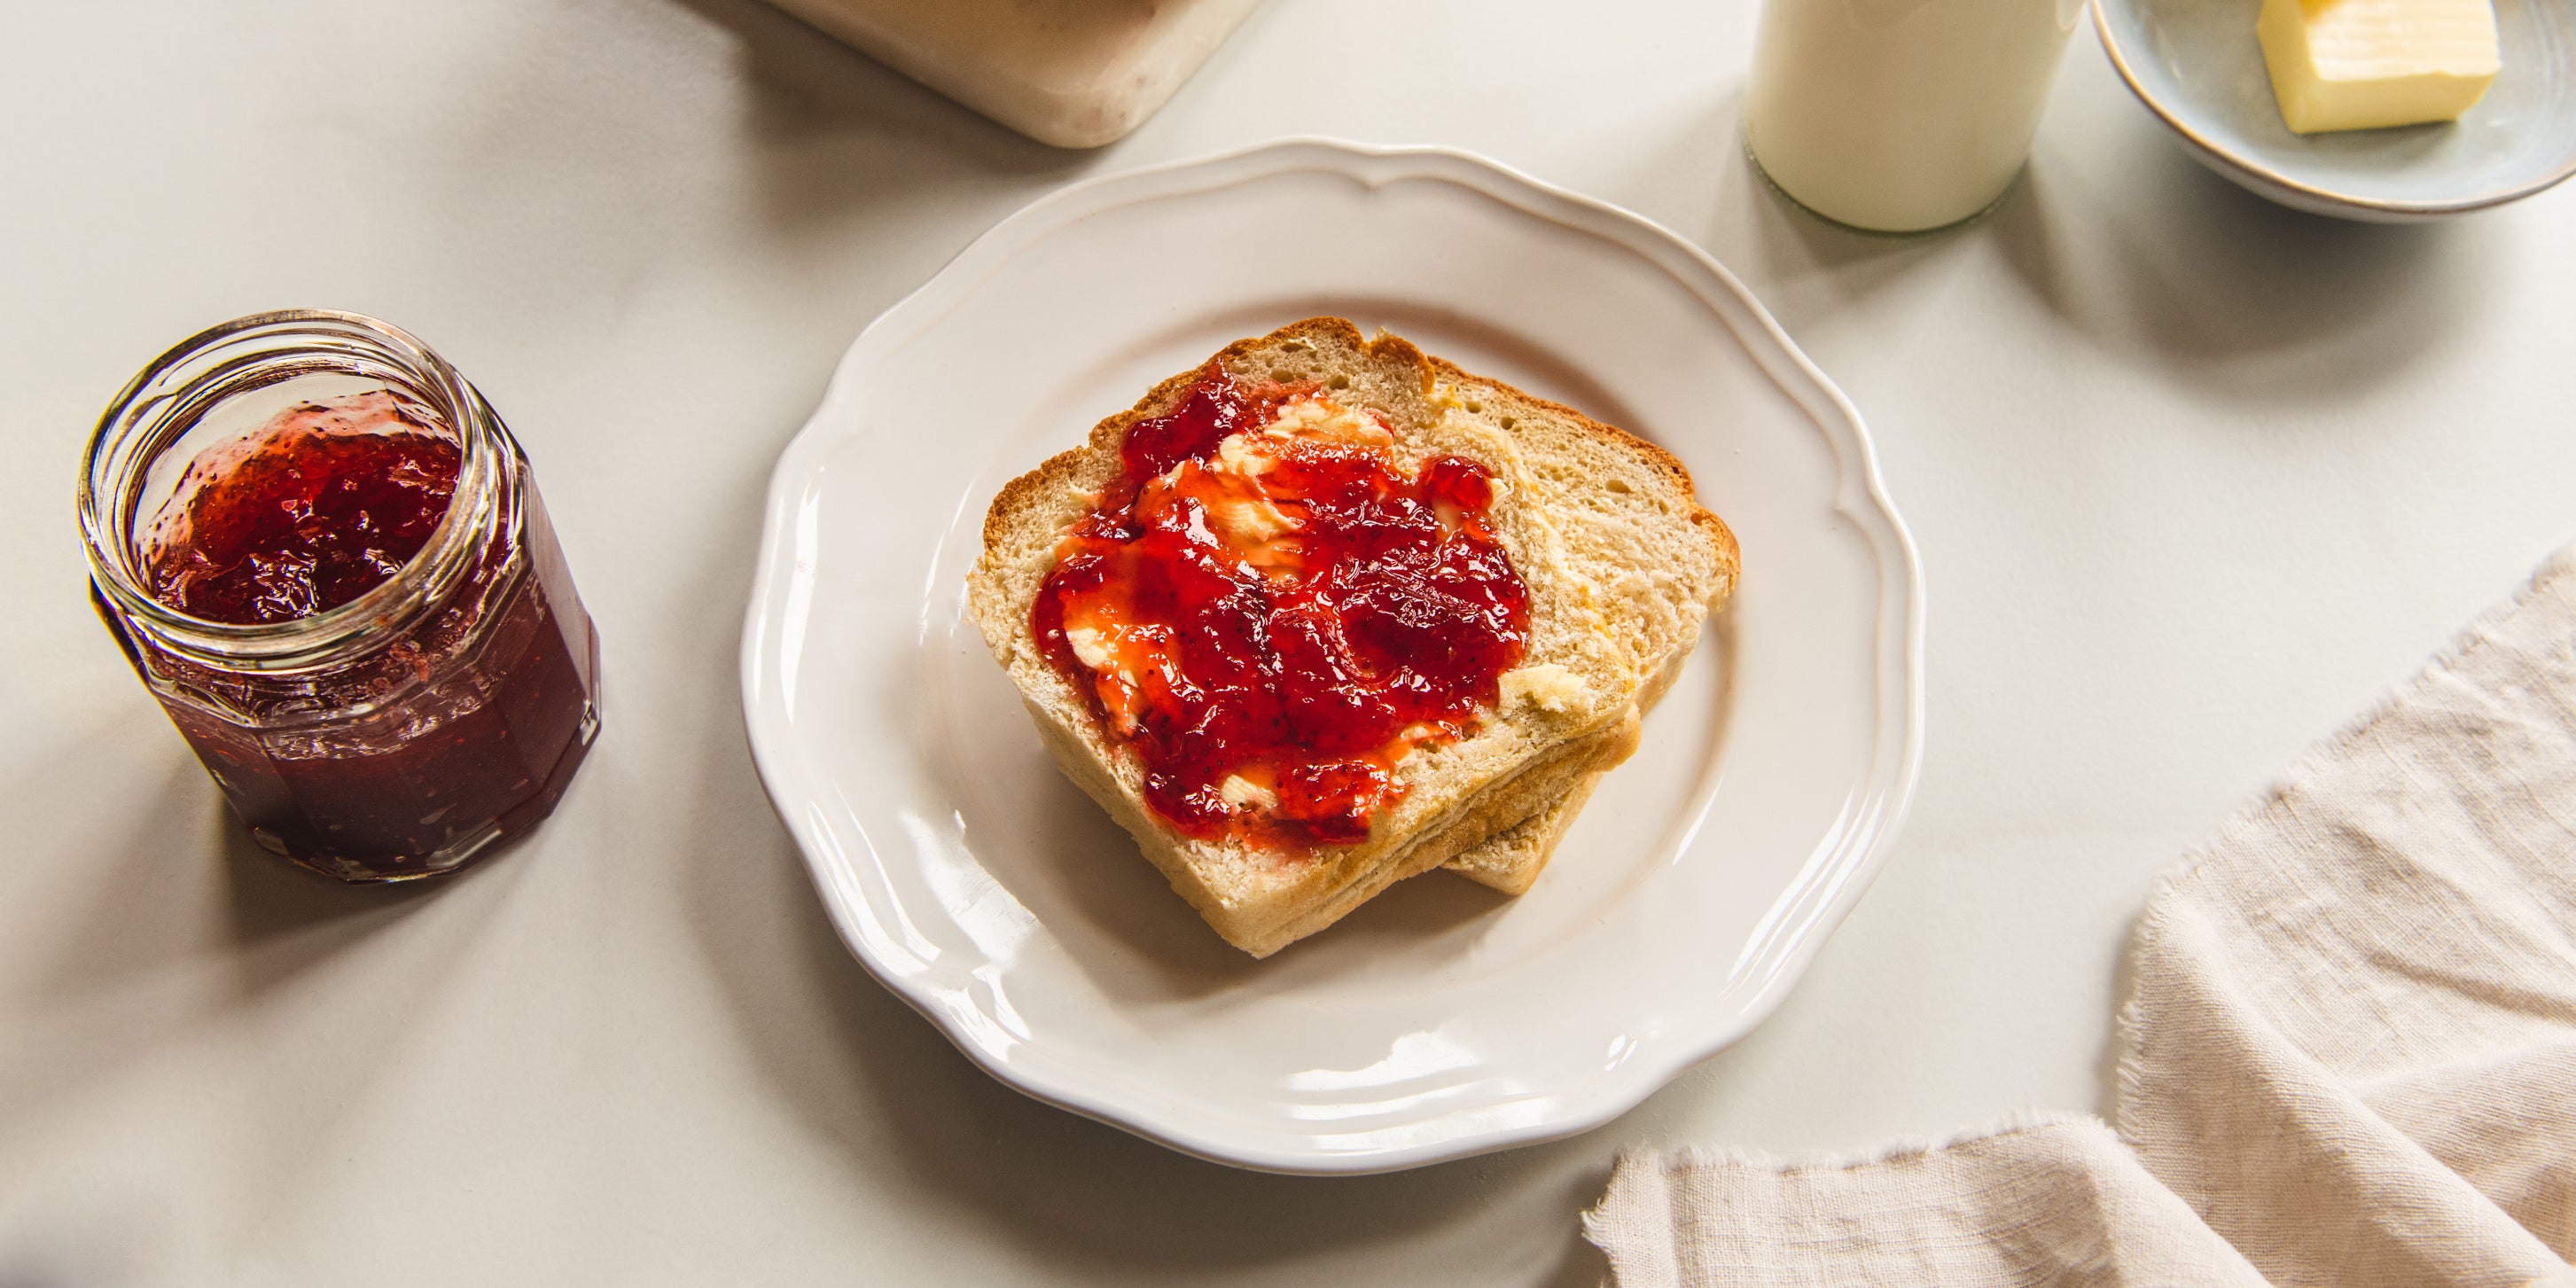 Shokupan Milk Bread slices with a spread of butter and jam